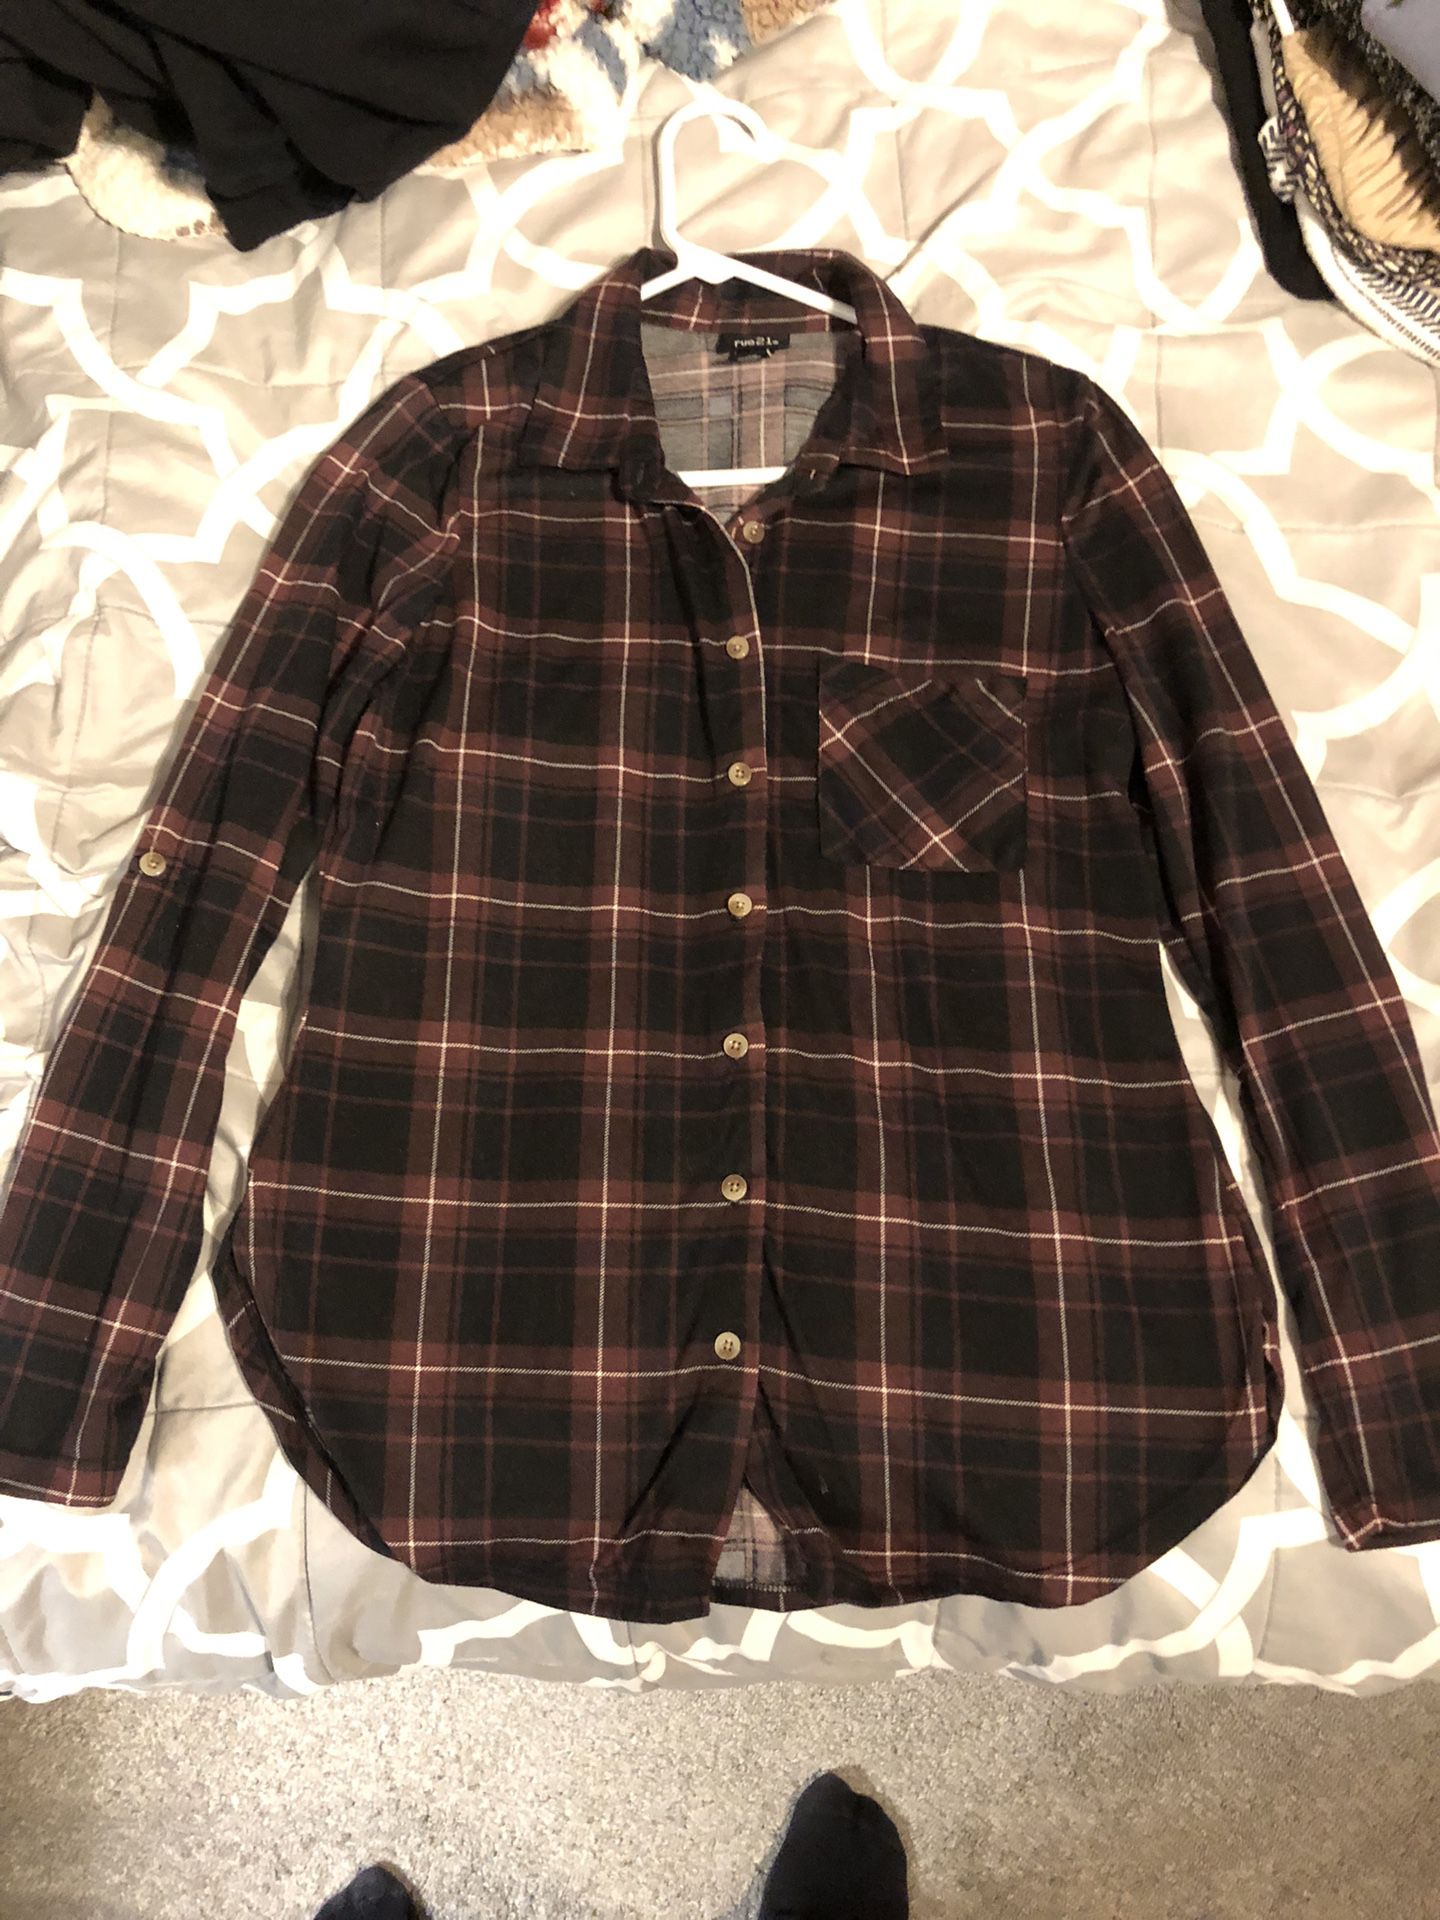 Rue 21 red flannel